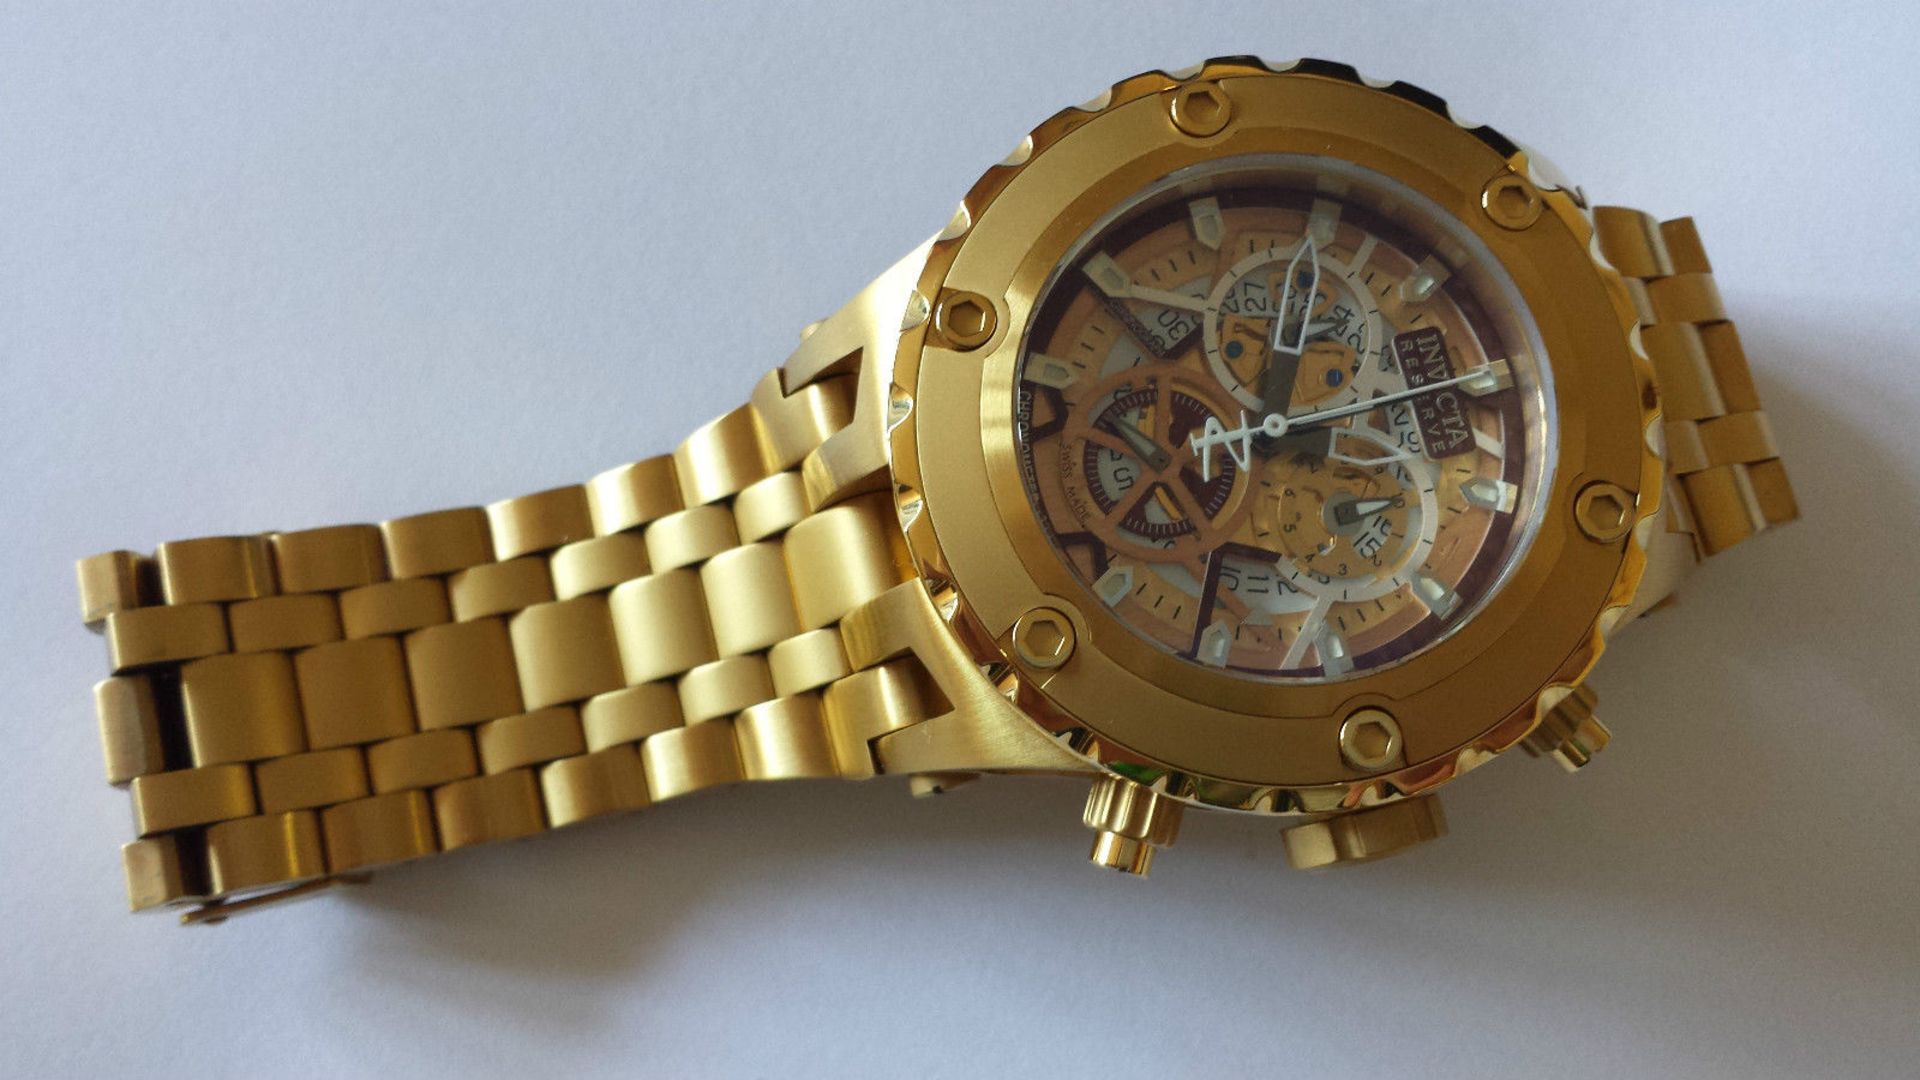 Invicta Reserve 1568 Dive Watch Gold Chronograph,boxed all papers included along with price- $4995 - Image 4 of 9